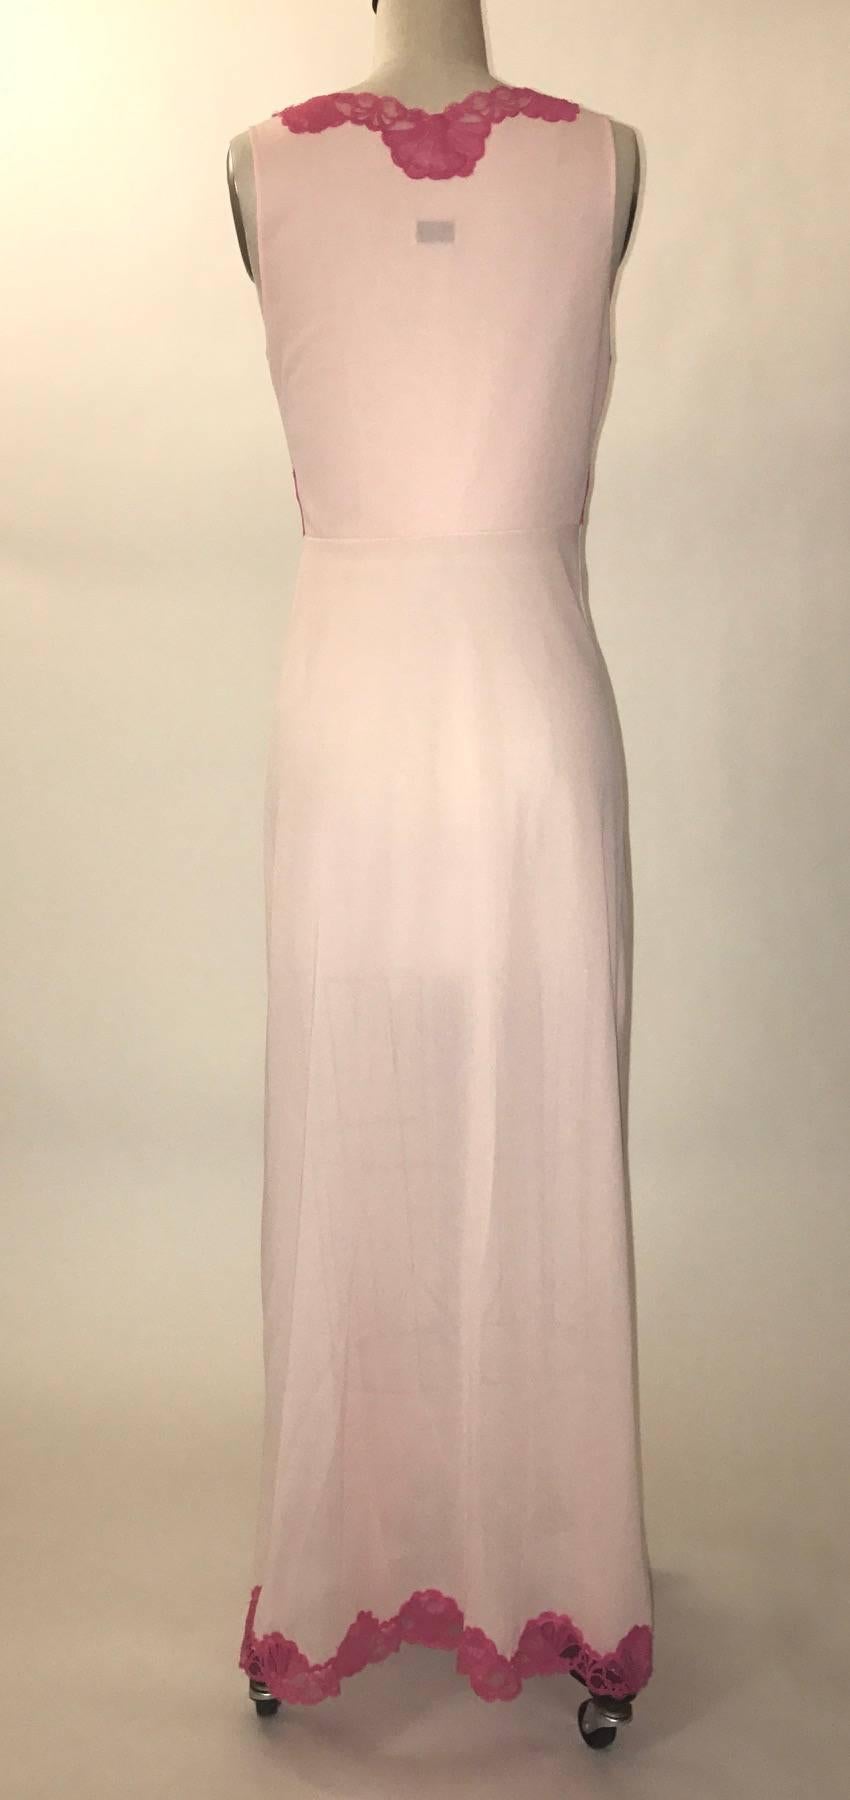 Emilio Pucci vintage 1960s semi sheer light pink long slip with hot pink lace trim at bodice and hem.

No content label, feels like nylon/synthetic.

Labelled size S.
Bust 34